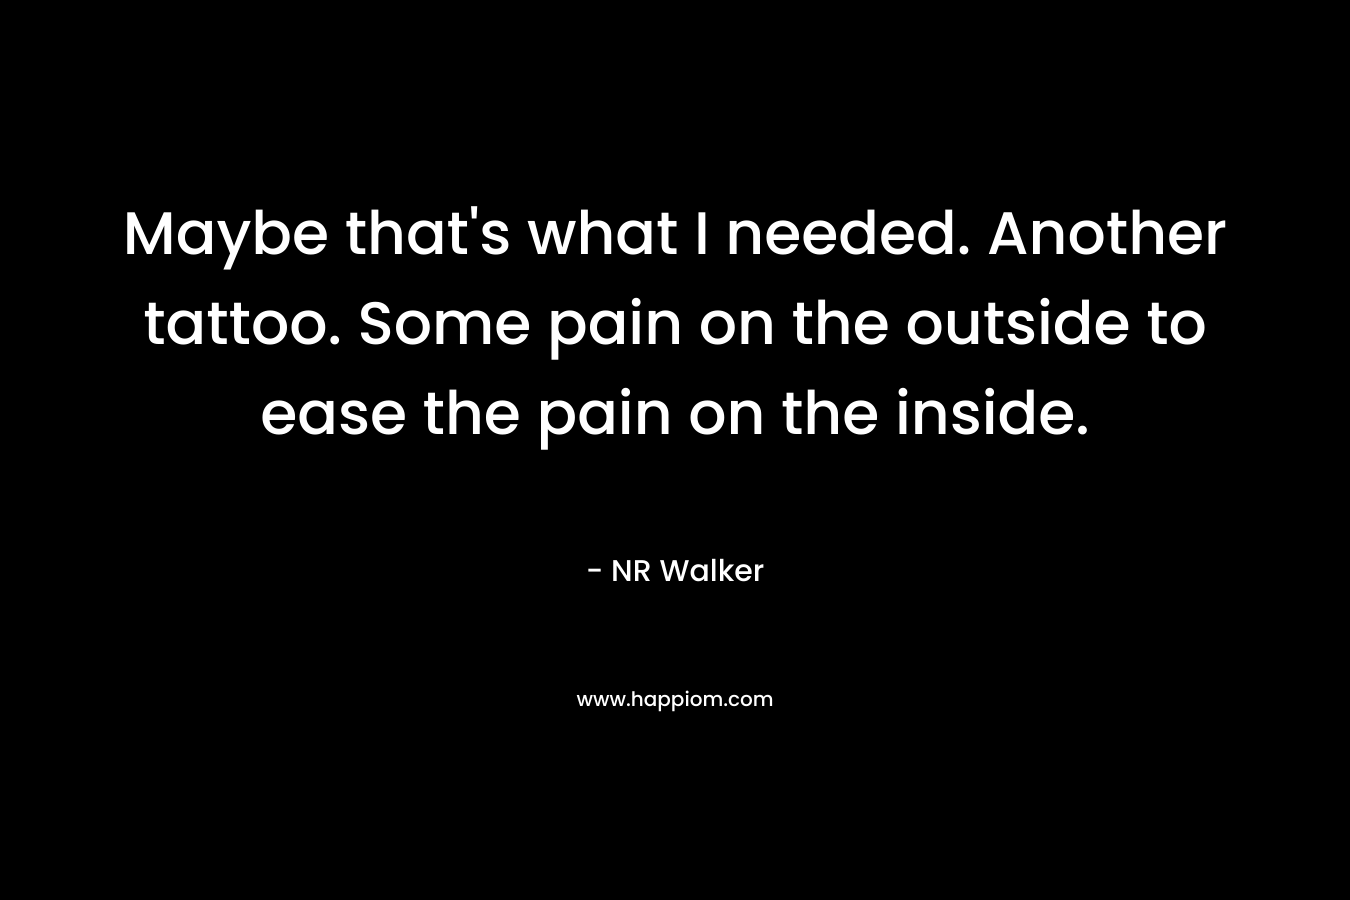 Maybe that’s what I needed. Another tattoo. Some pain on the outside to ease the pain on the inside. – NR Walker